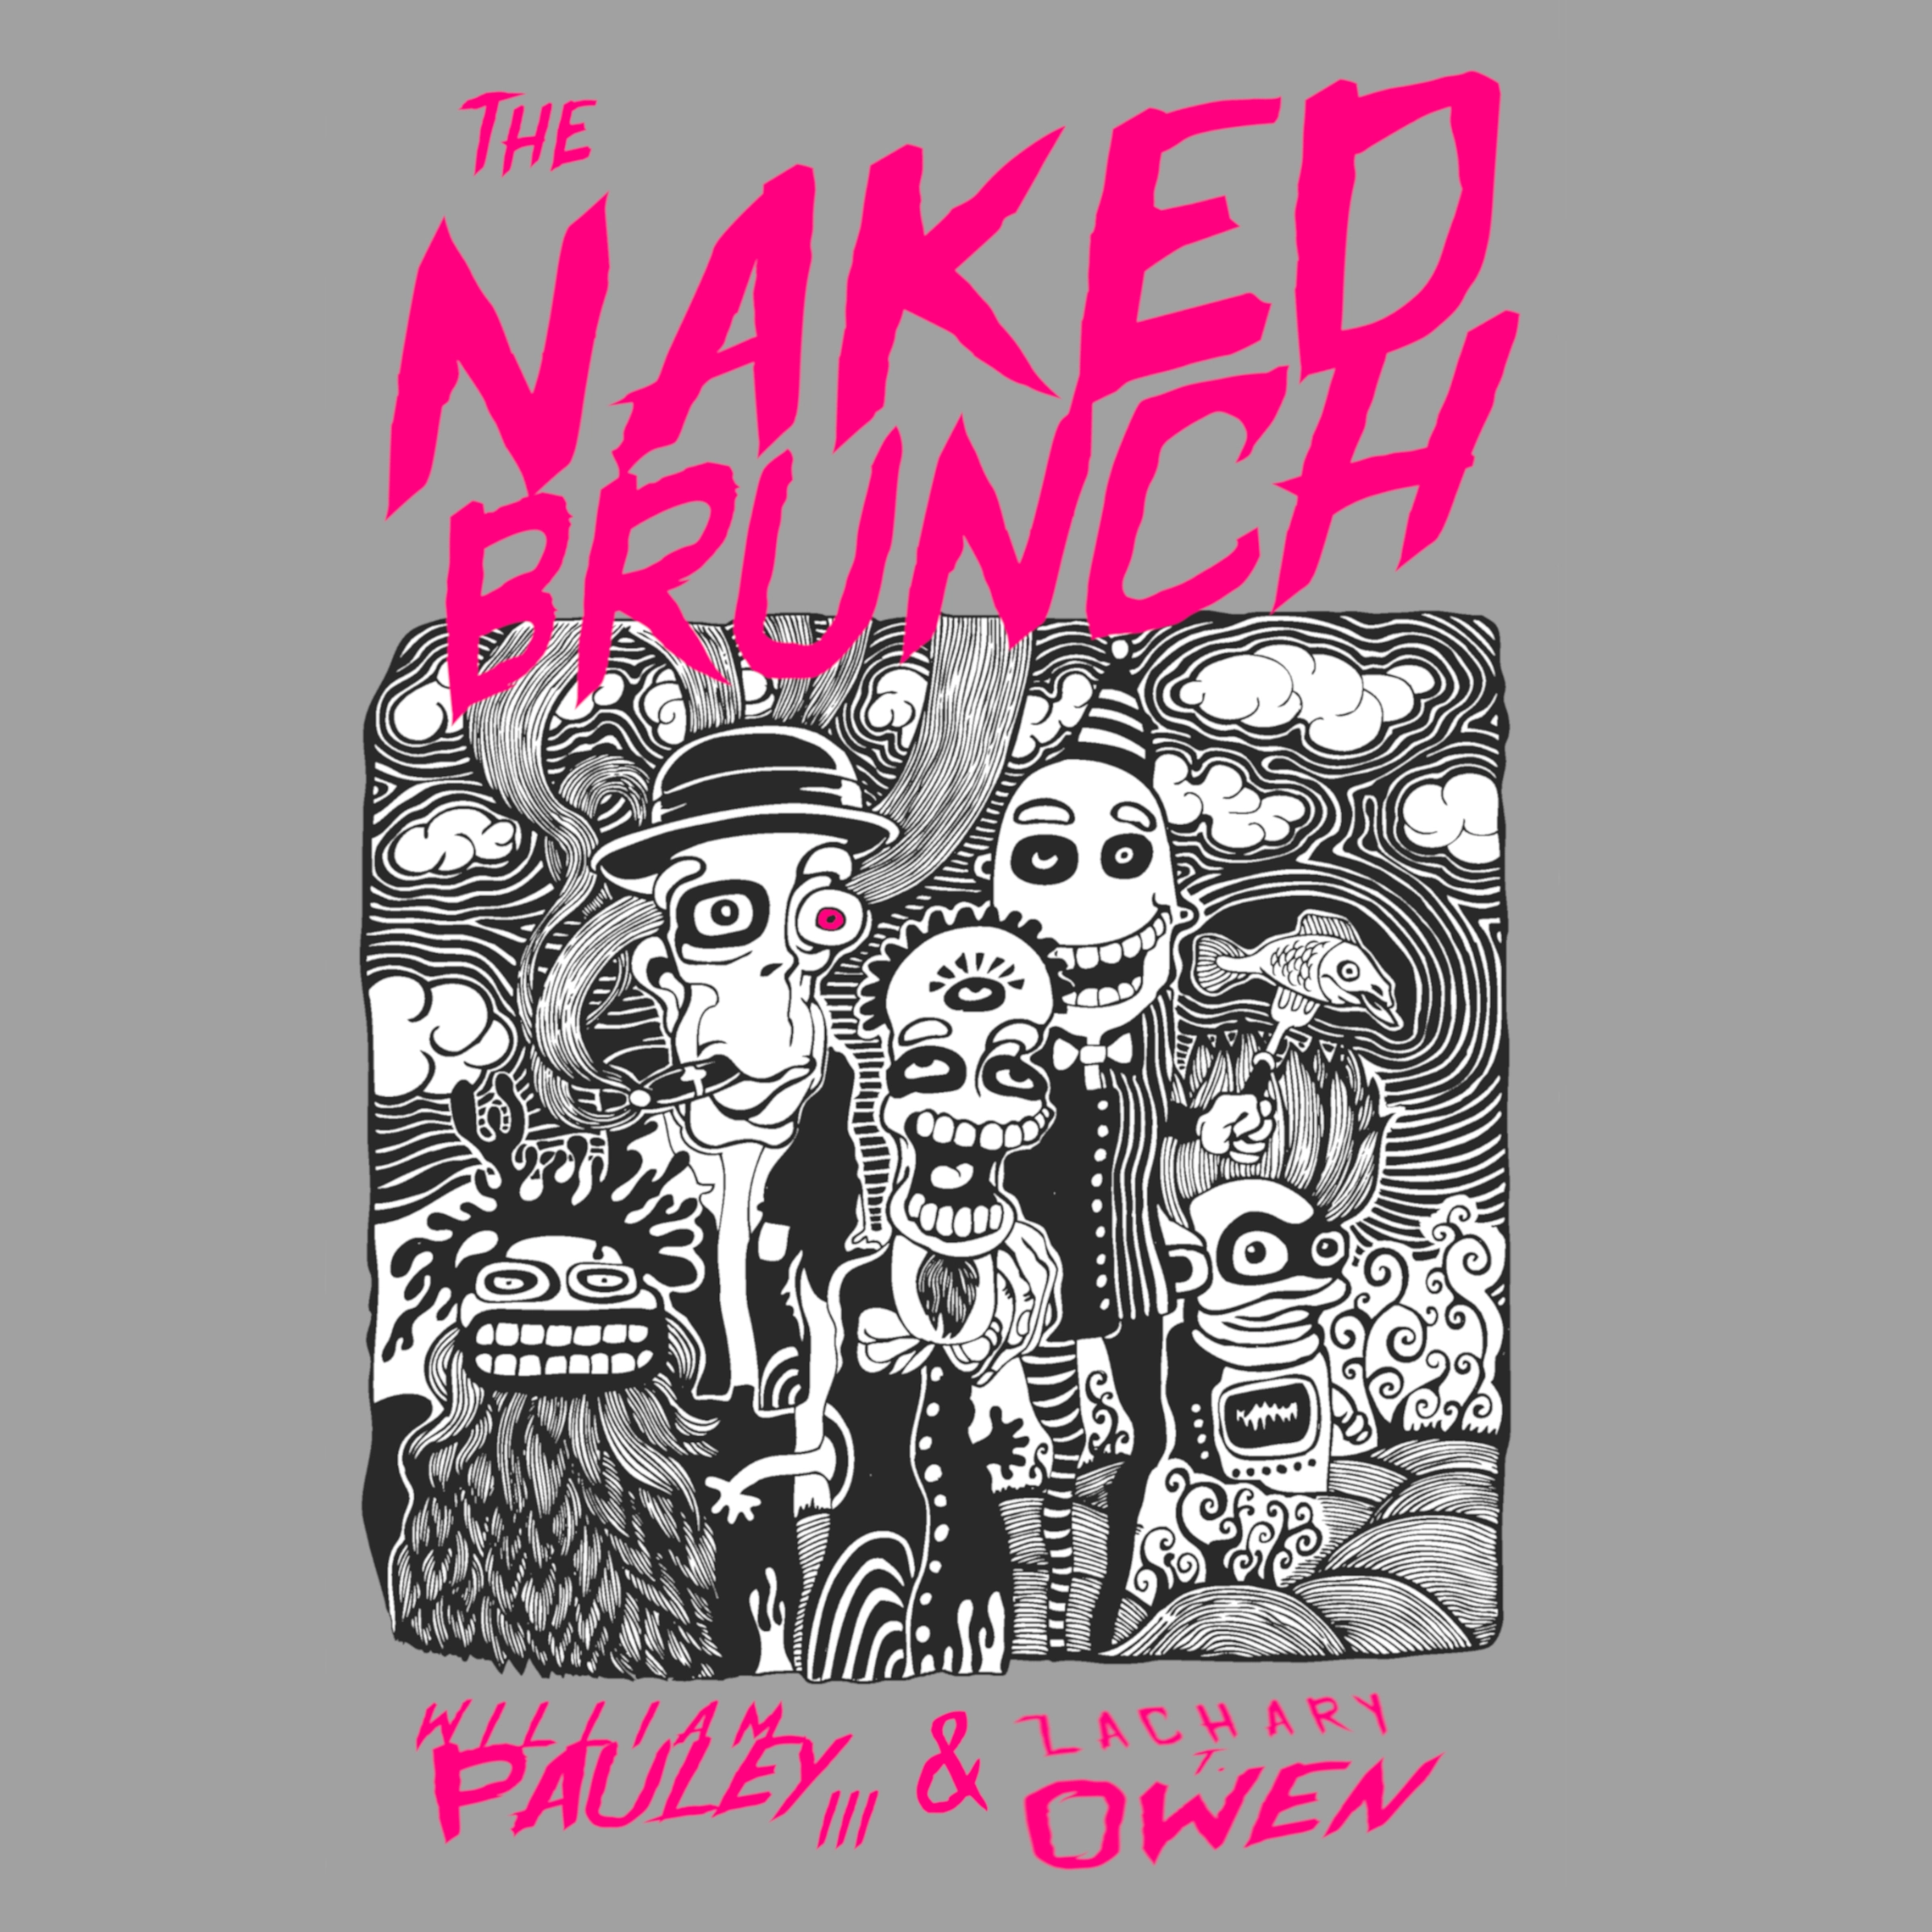 The Naked Brunch Audiobook by Zachary T. Owen